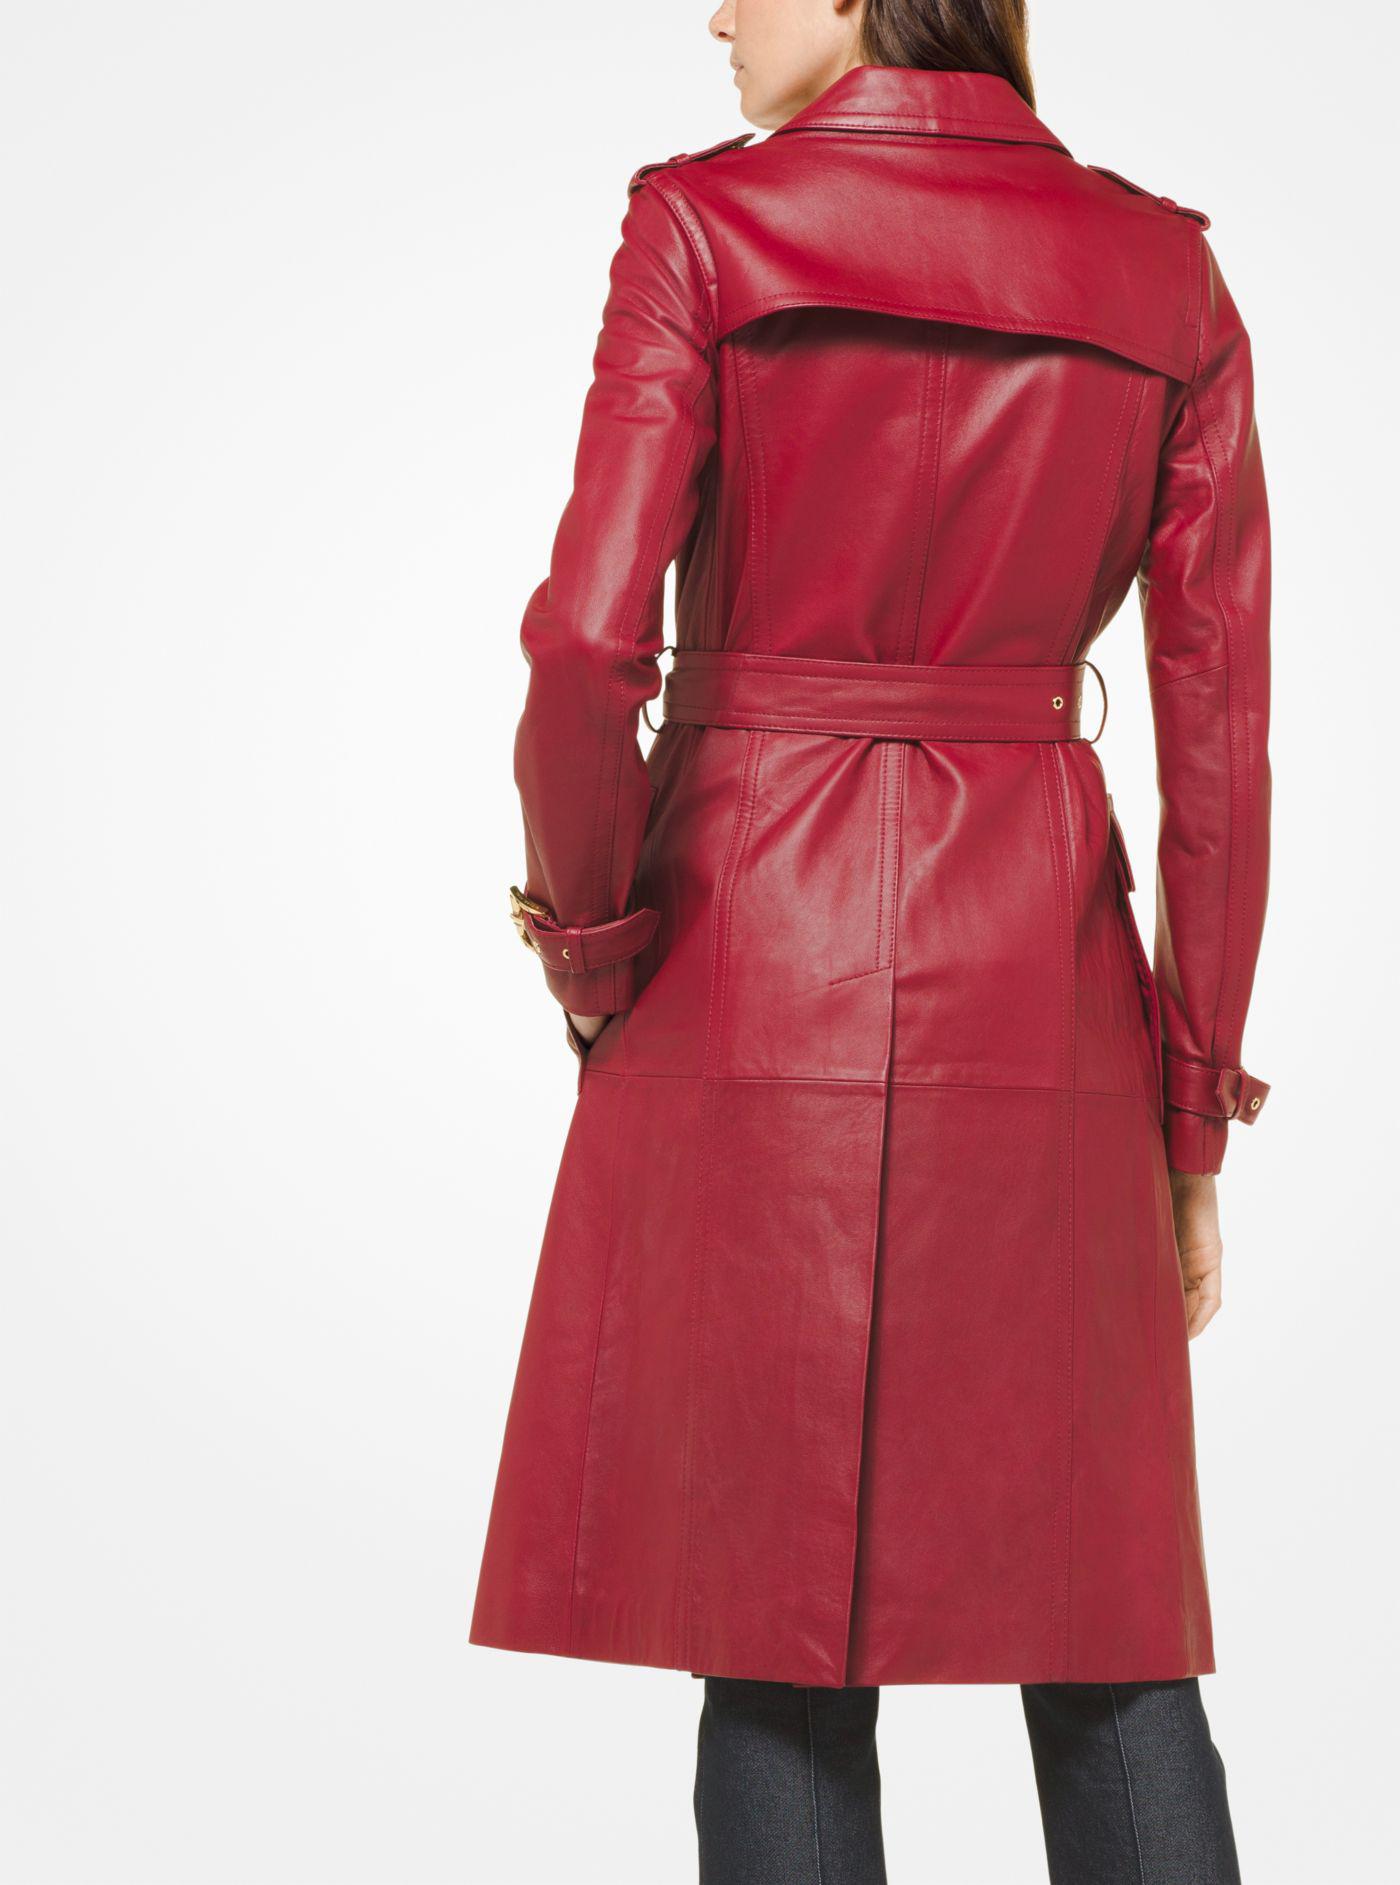 Michael Kors Leather Trench Coat in Red | Lyst